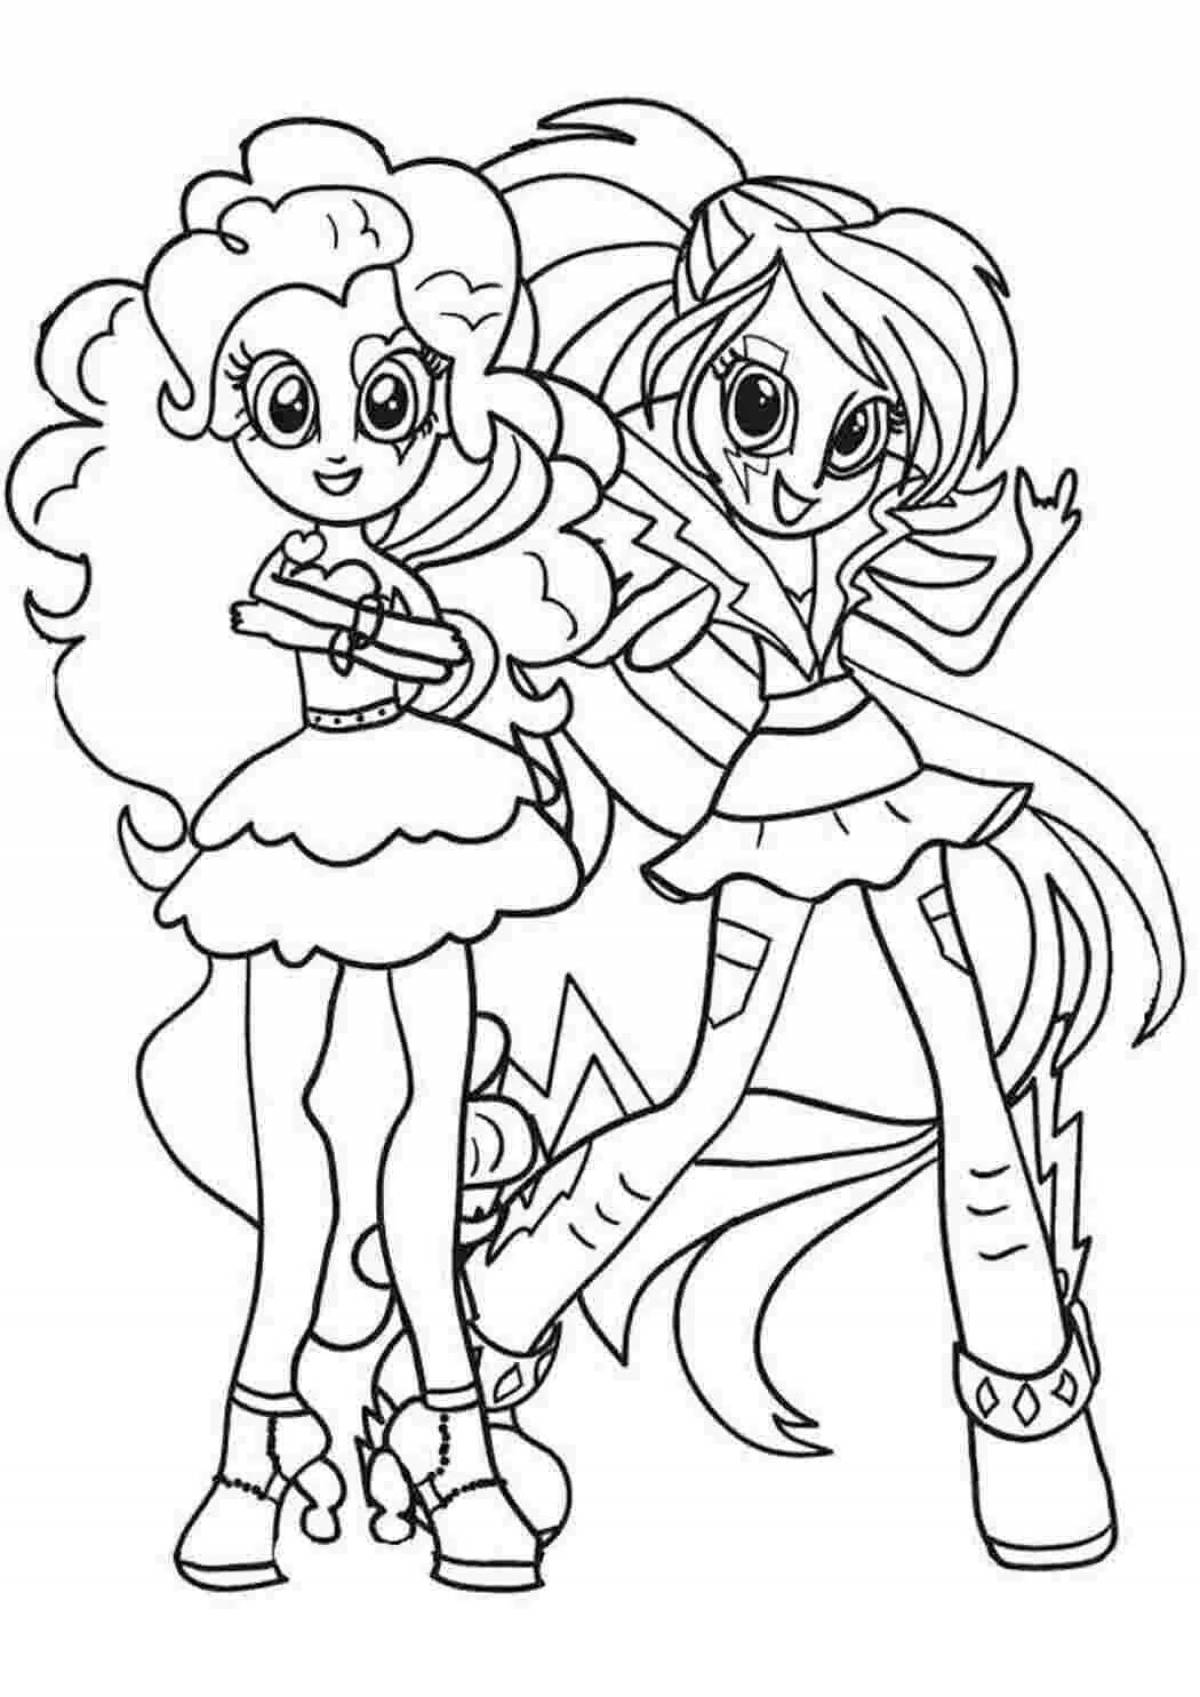 Soulful equestria girls coloring page